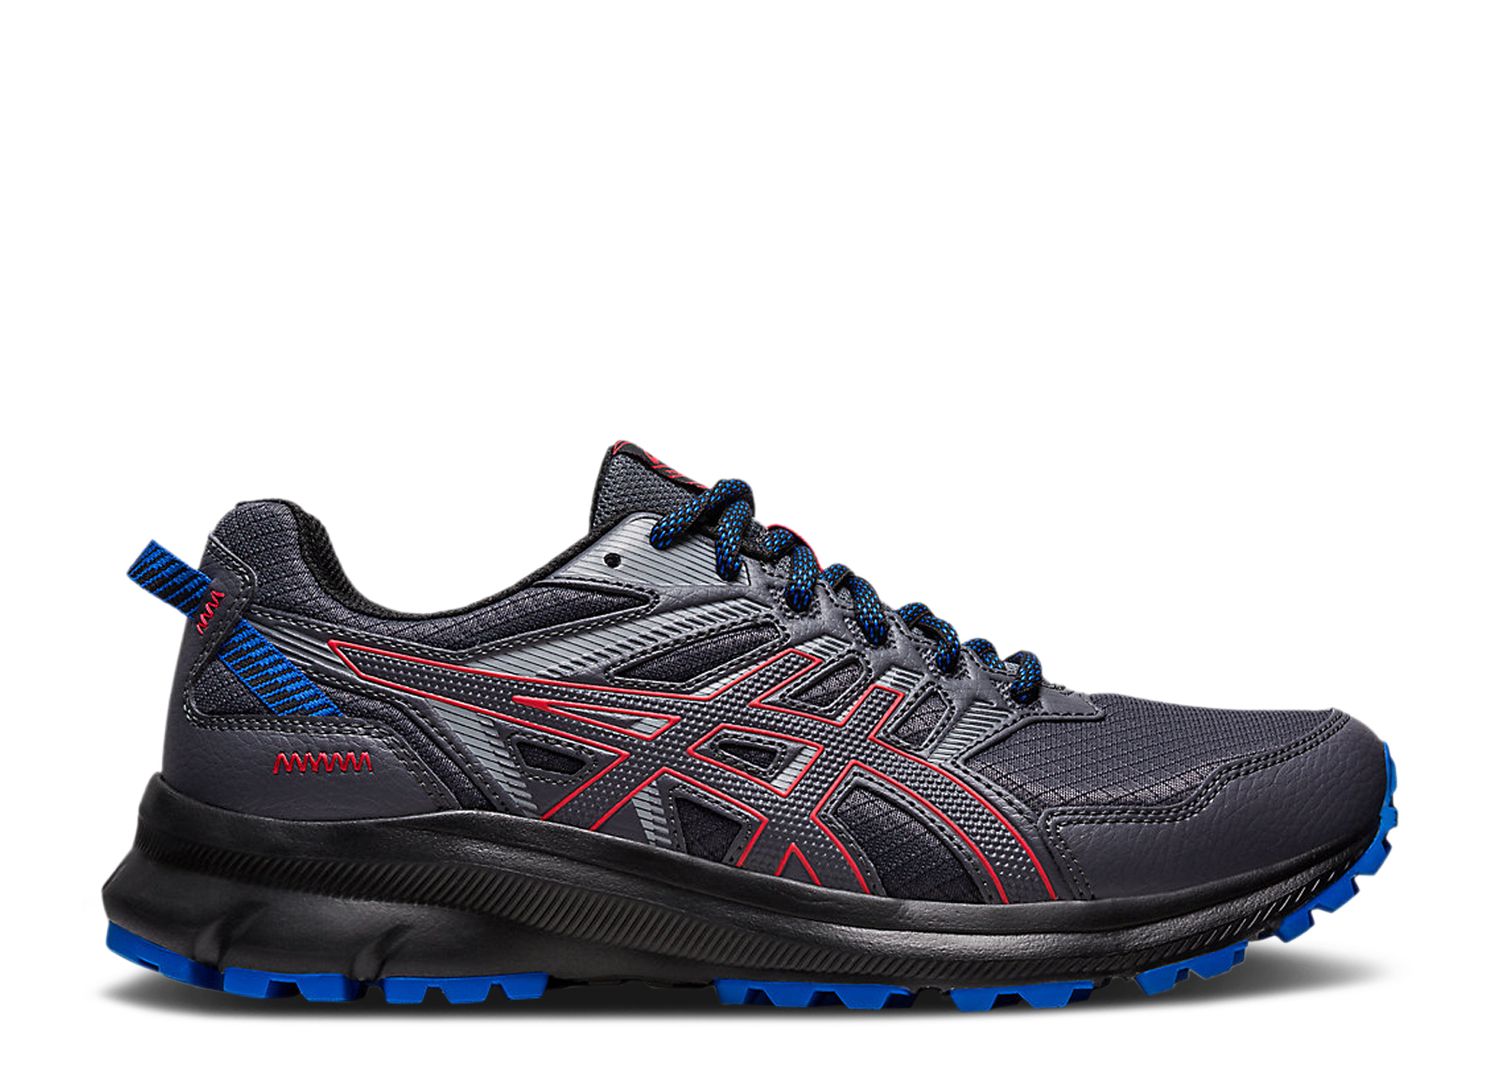 Trail Scout 2 'Carrier Grey Red Blue' - ASICS - 1011B181 021 - carrier ...